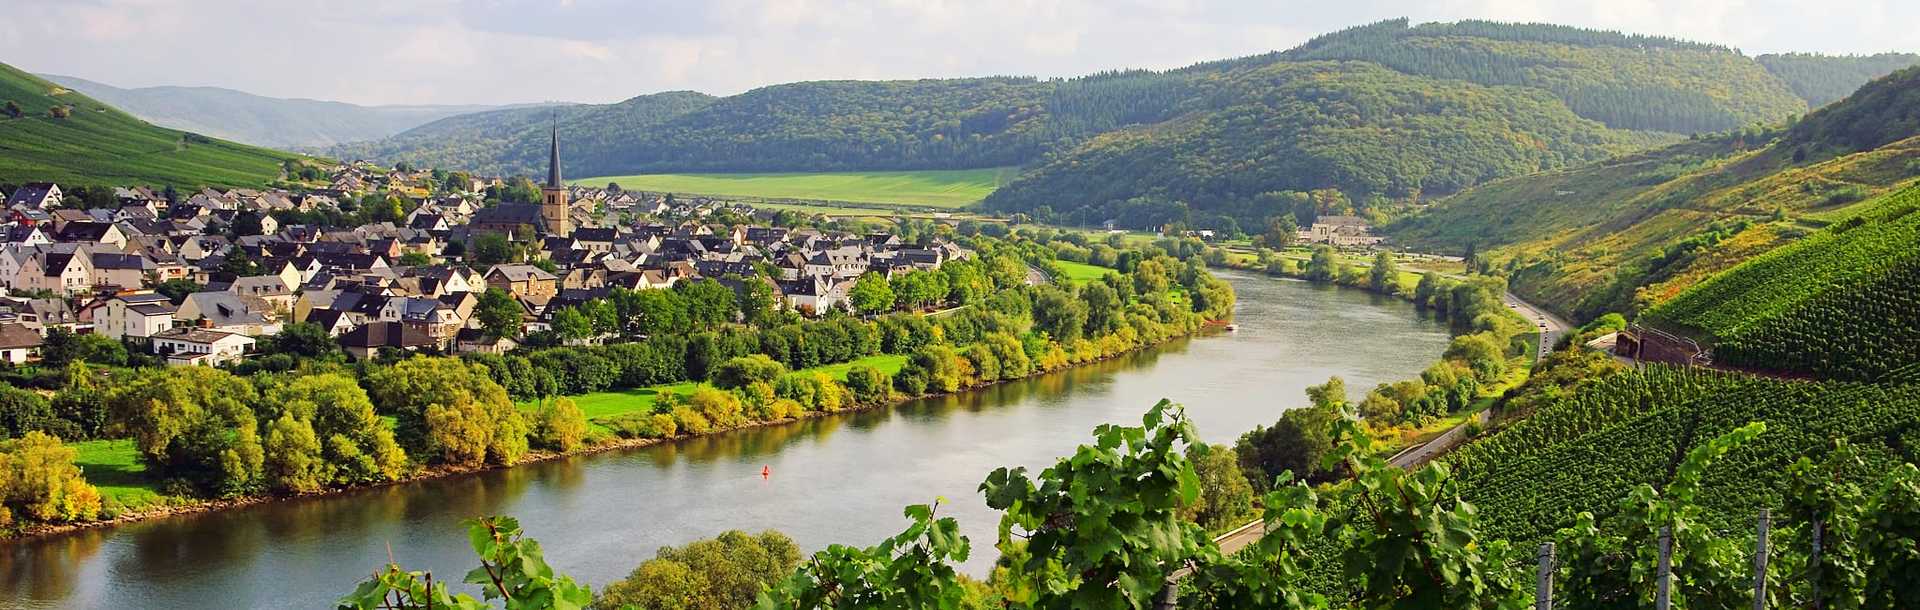 Moselle river winding through vineyards in the Rhineland, Germany.